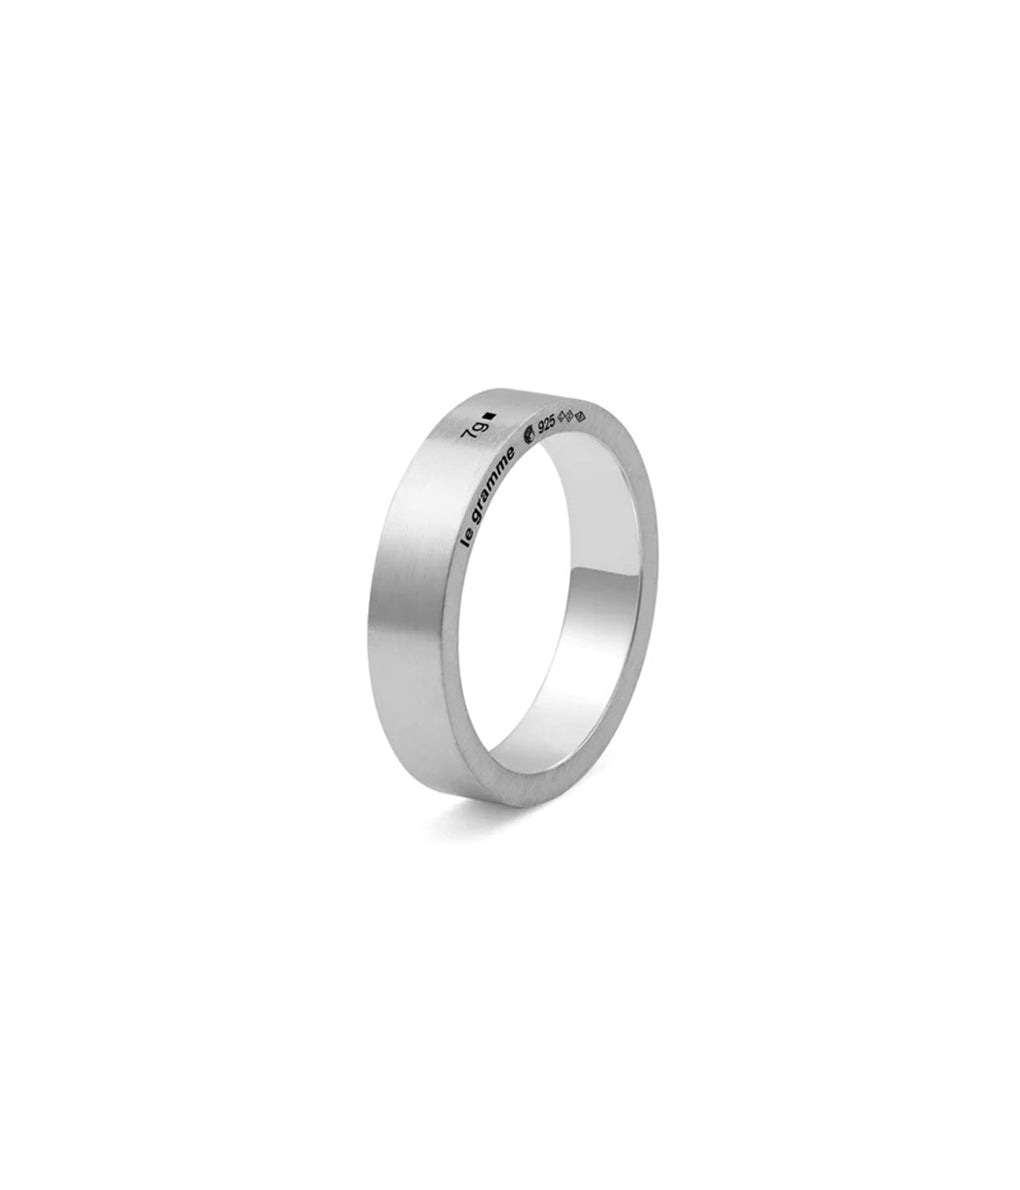 LE GRAMME "7G RIBBON RING BRUSHED" (NEW)